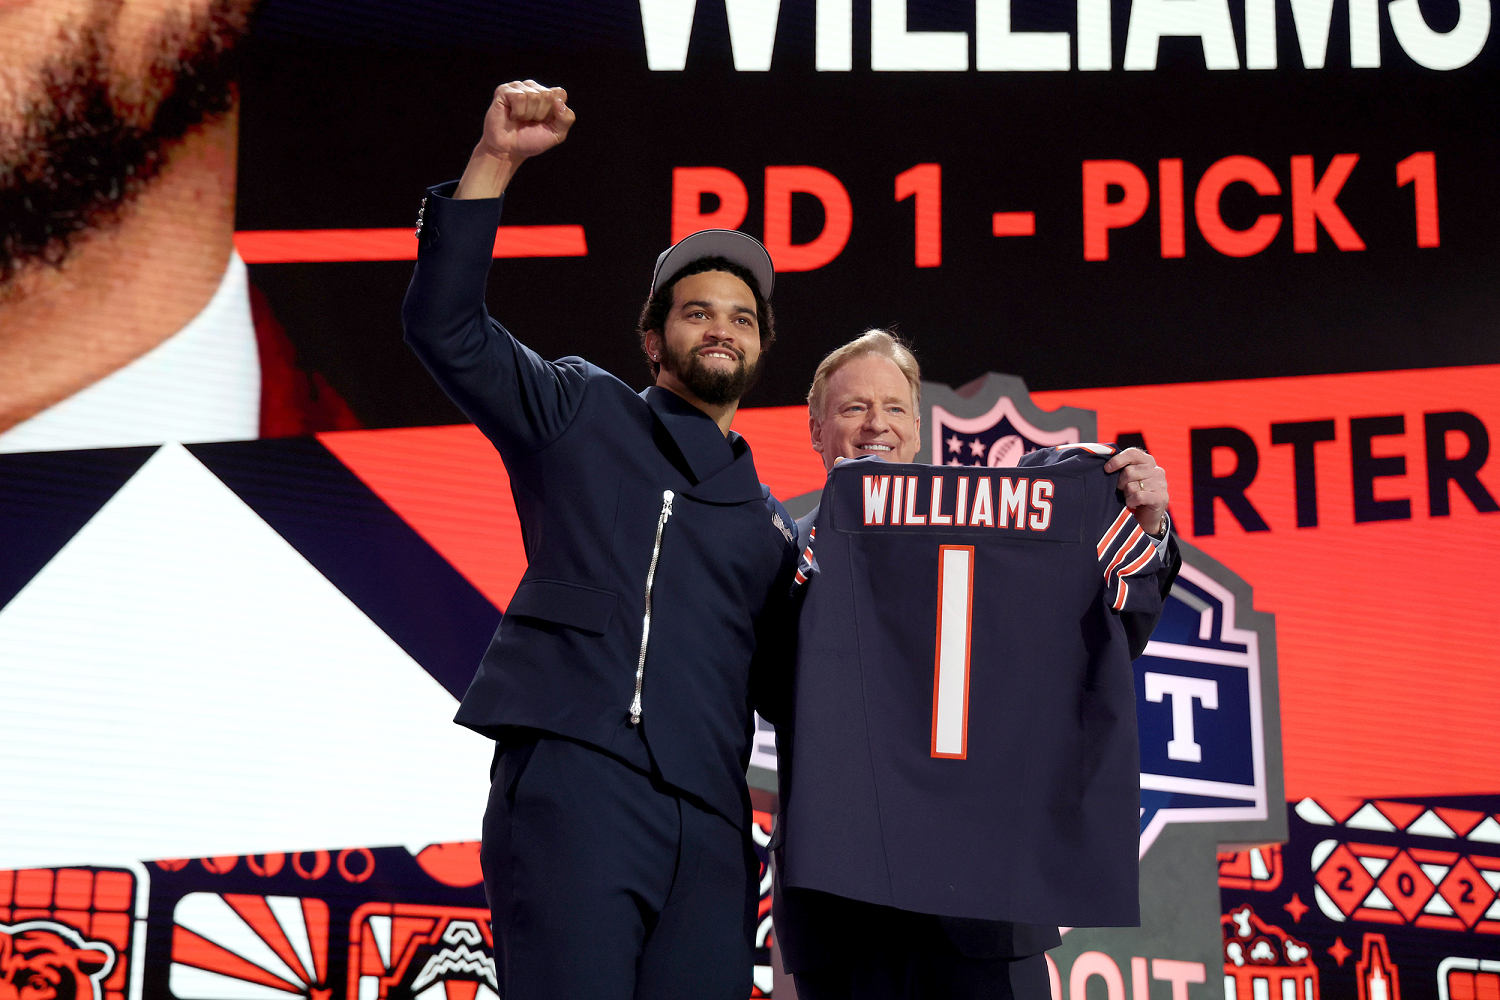 Chicago Bears draft star QB Caleb Williams with the No. 1 pick